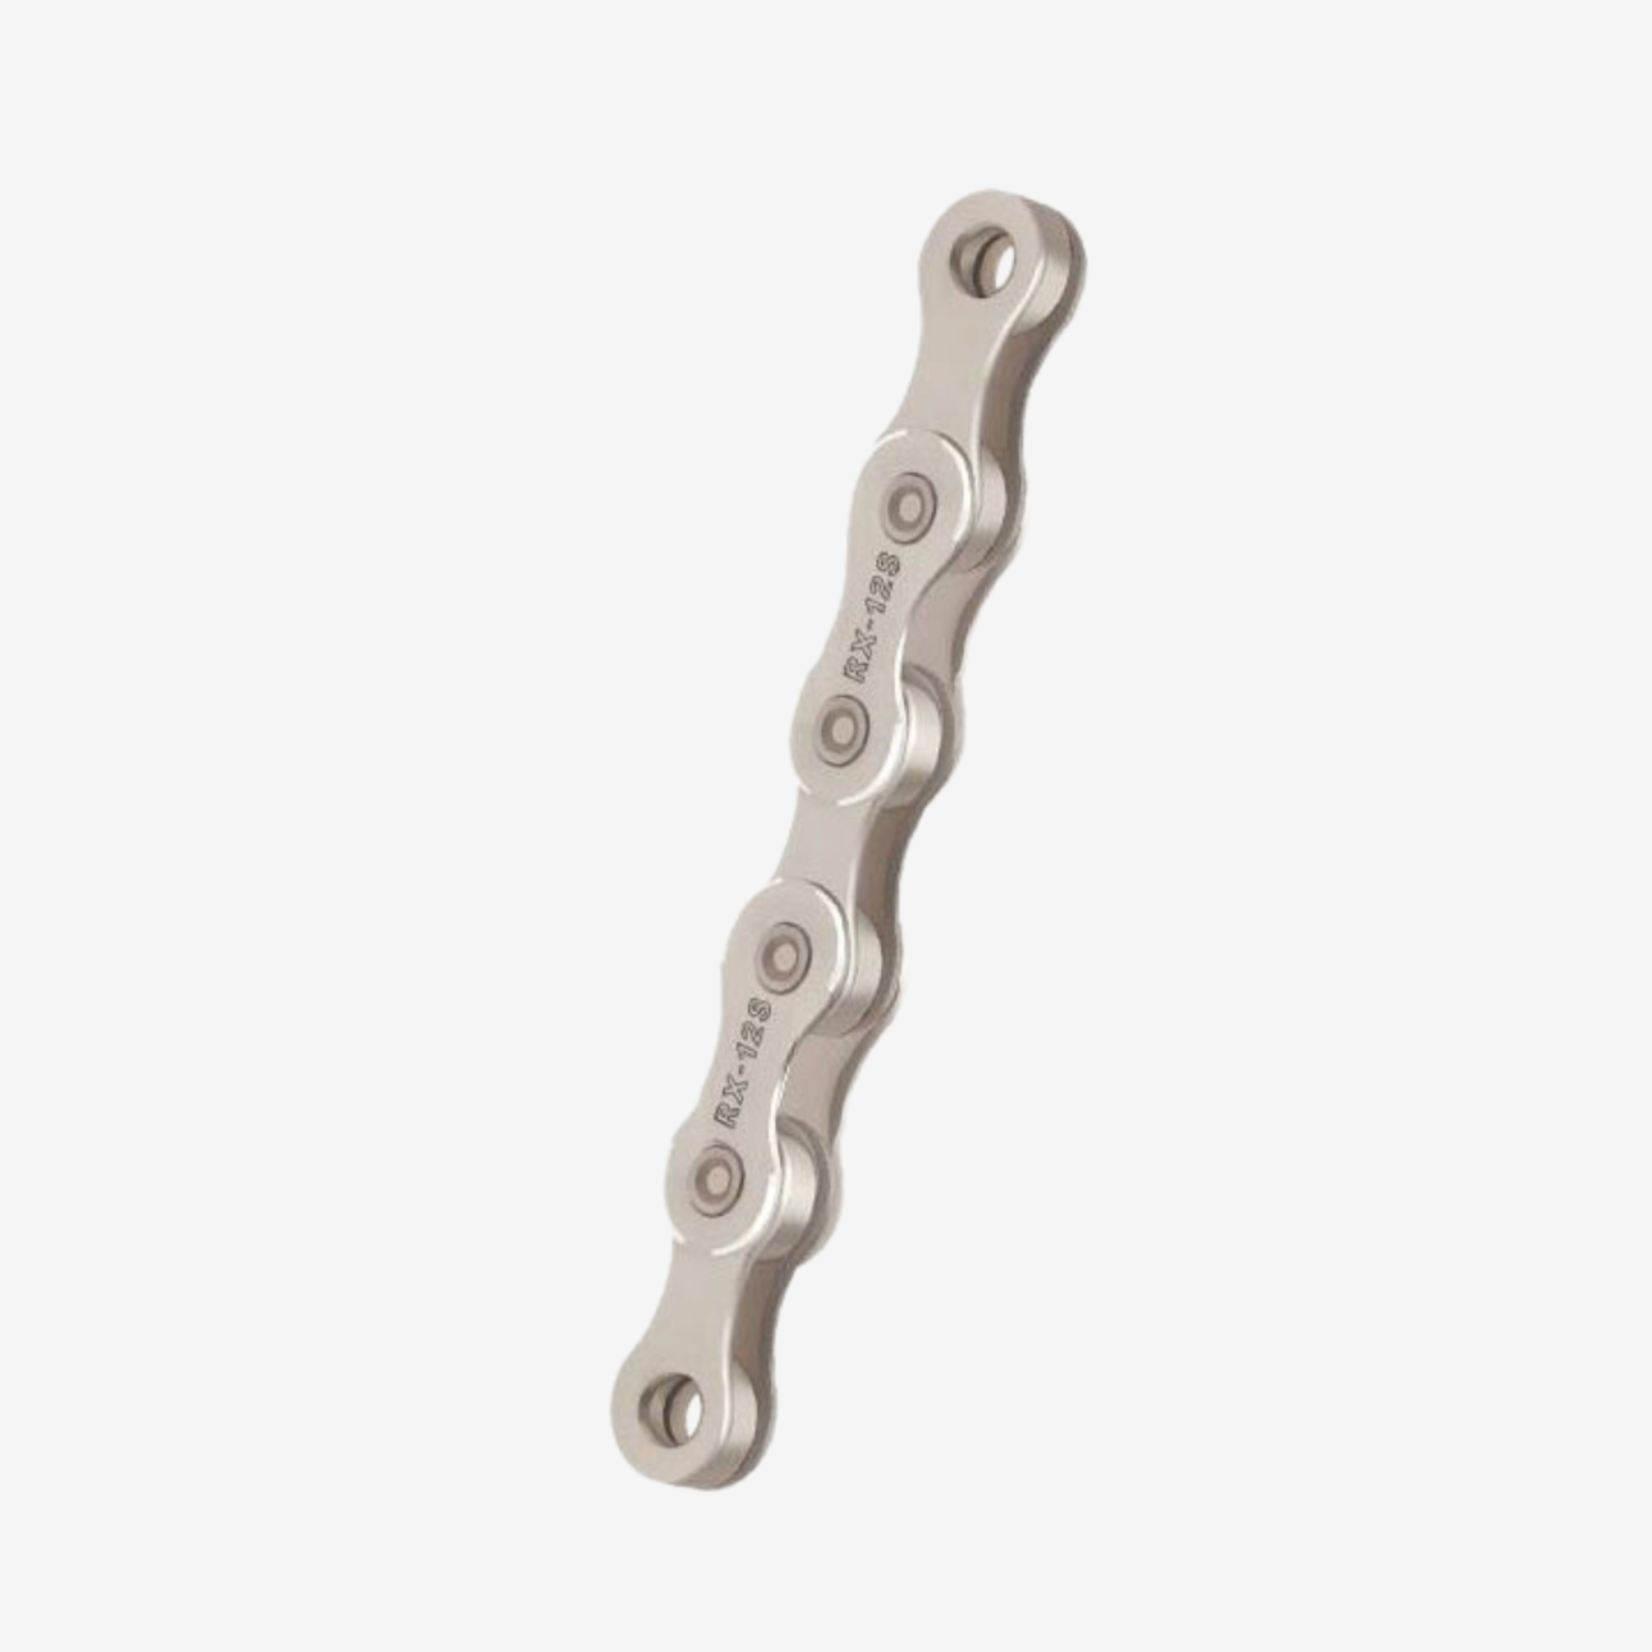 HLC VARIA 12-SPEED 126 LINK CHAIN